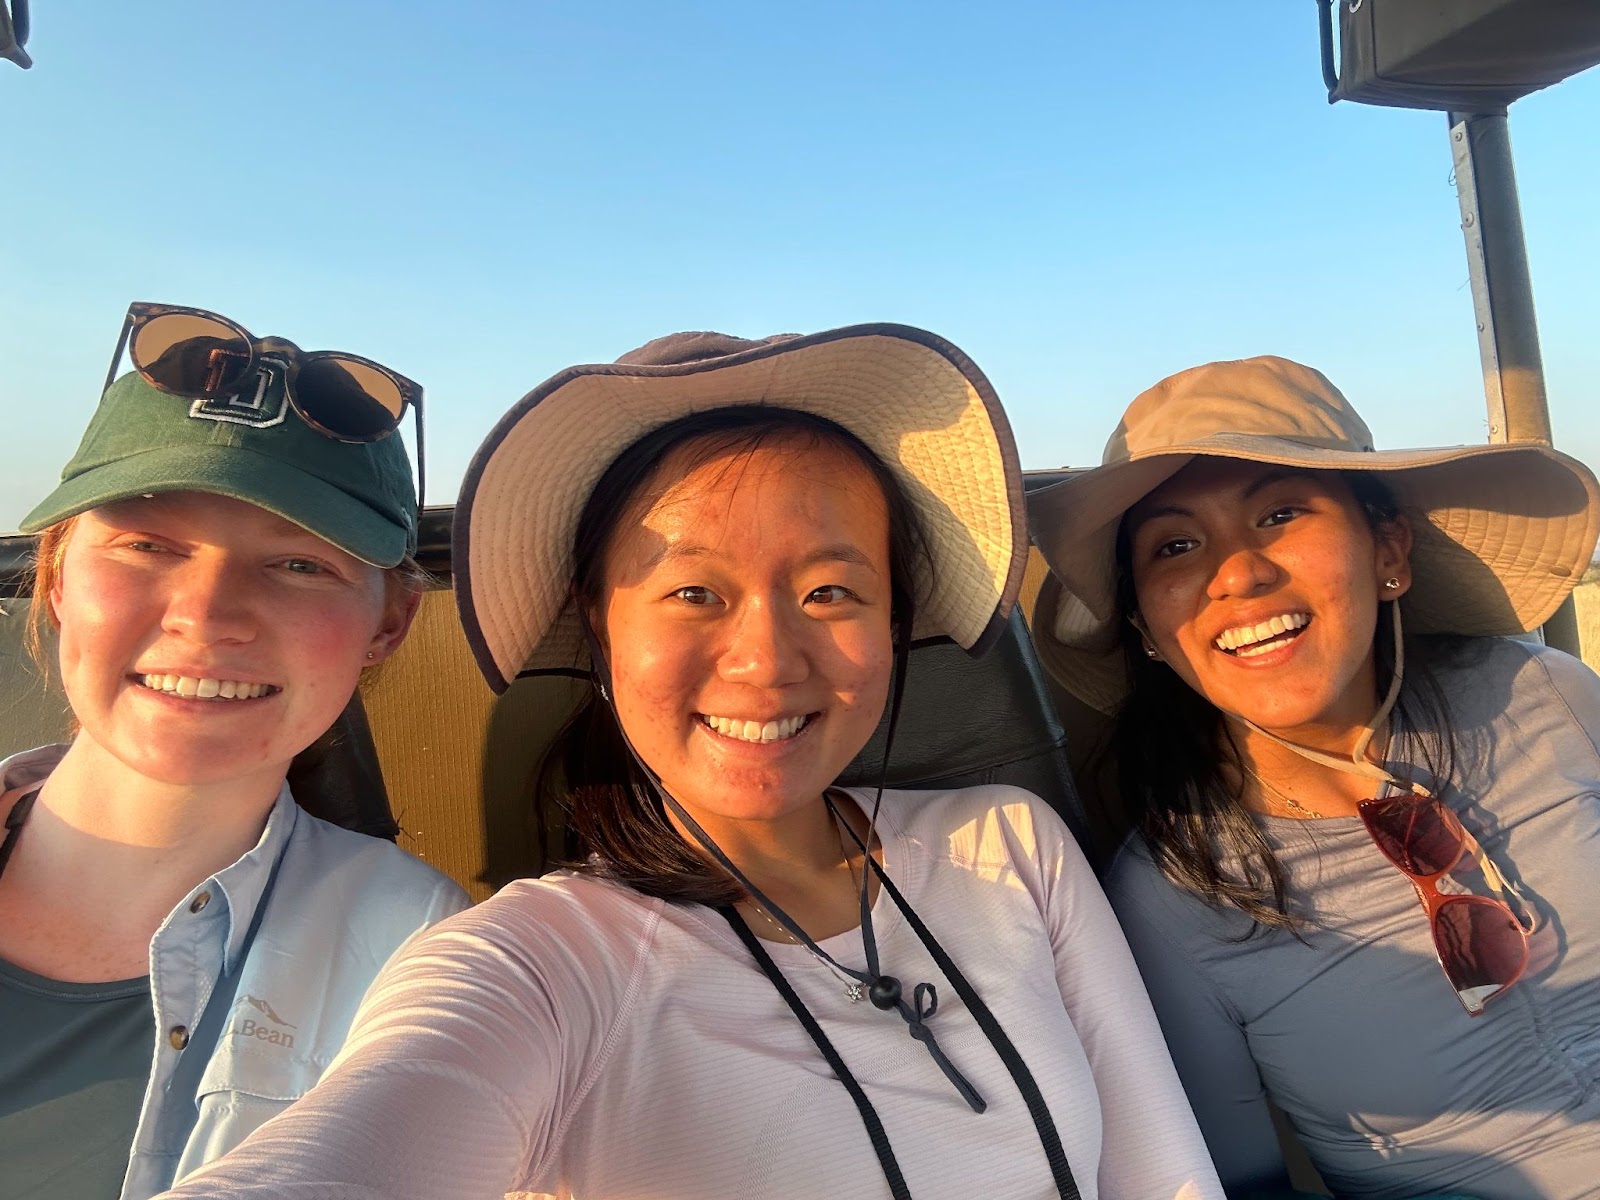 A selfie with myself and two other girls on the back of the game drive vehicle.